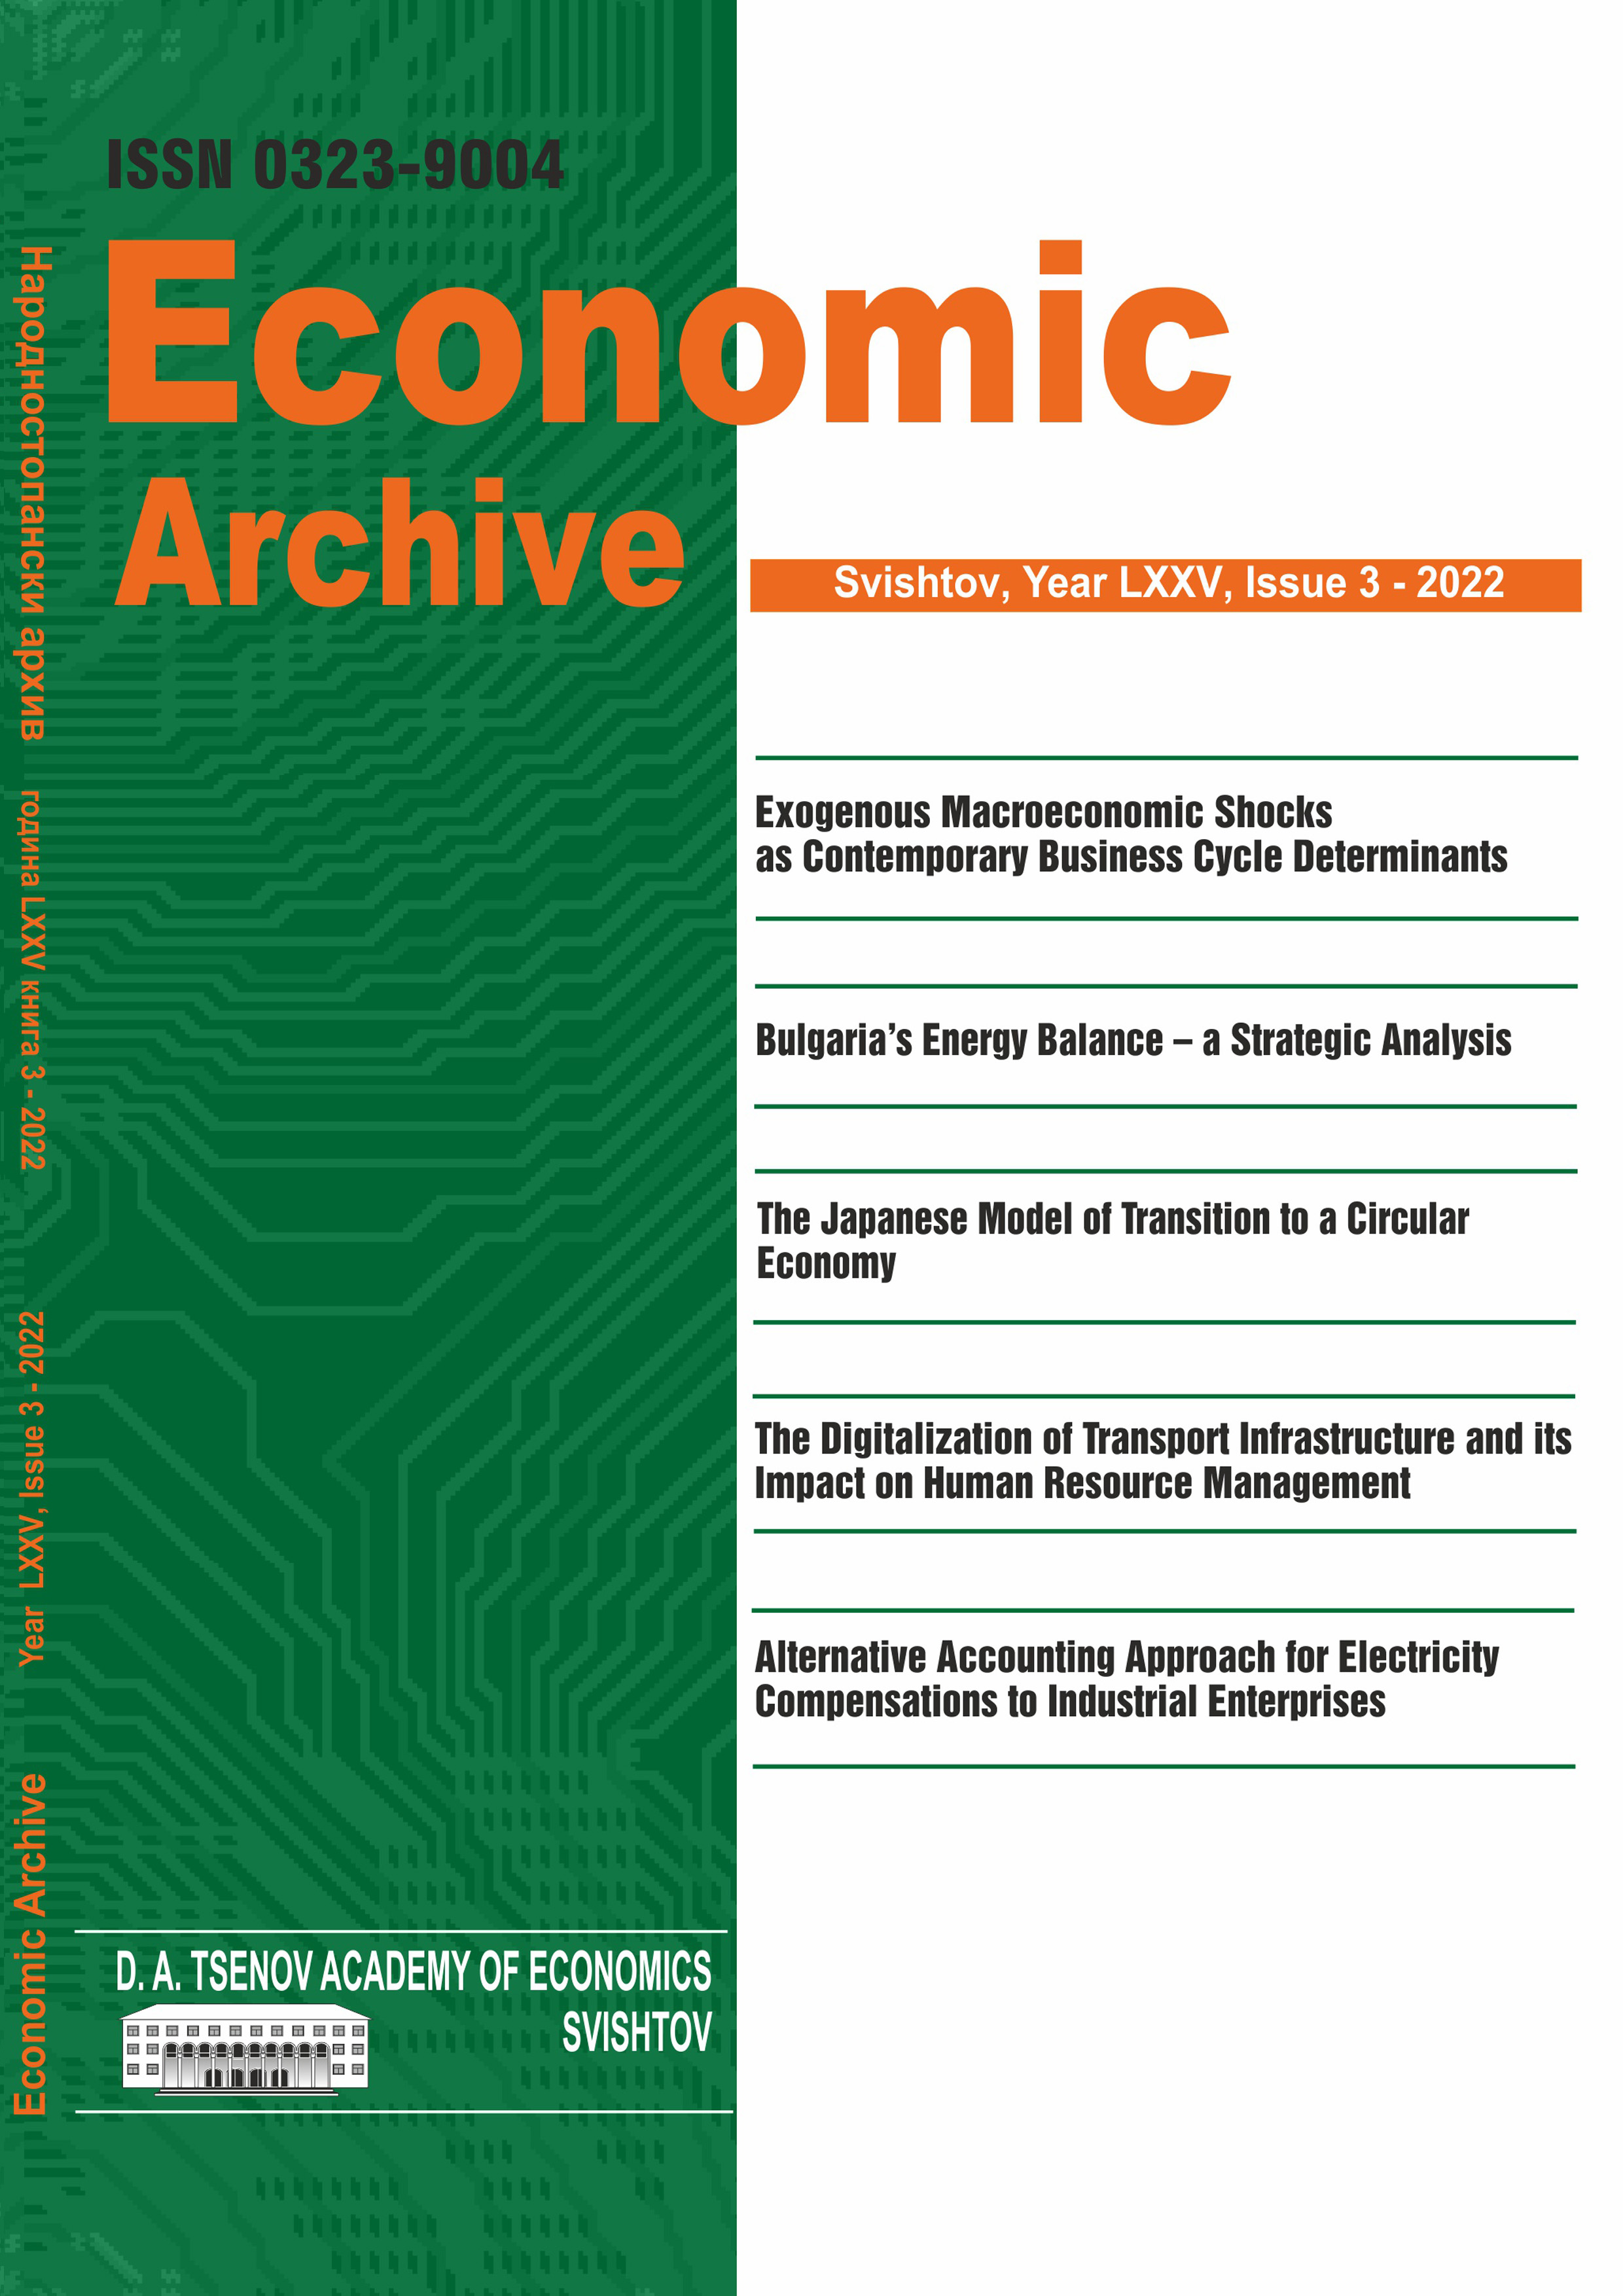 Exogenous Macroeconomic Shocks As Contemporary Business Cycle Determinants